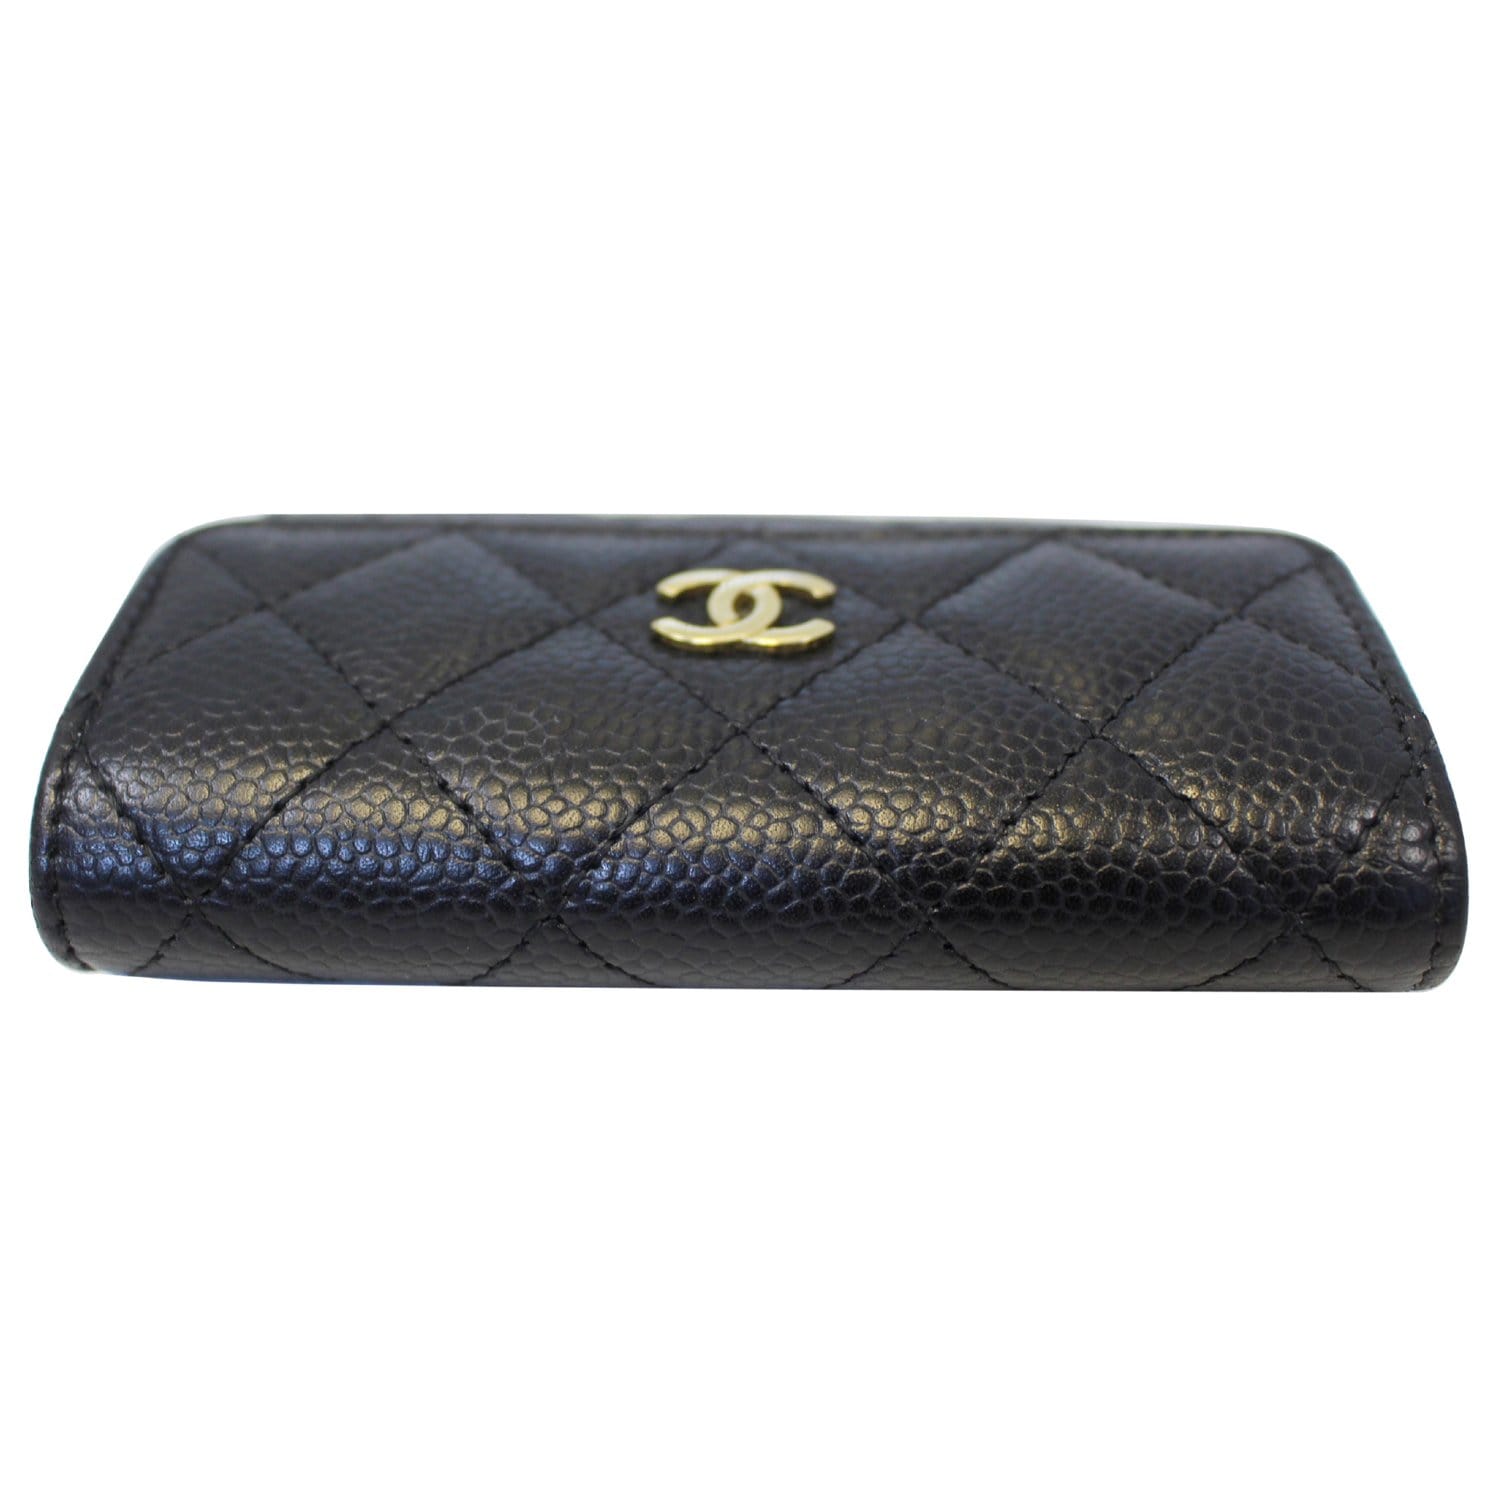 Chanel Black Quilted Caviar Flap Card Holder Wallet, myGemma